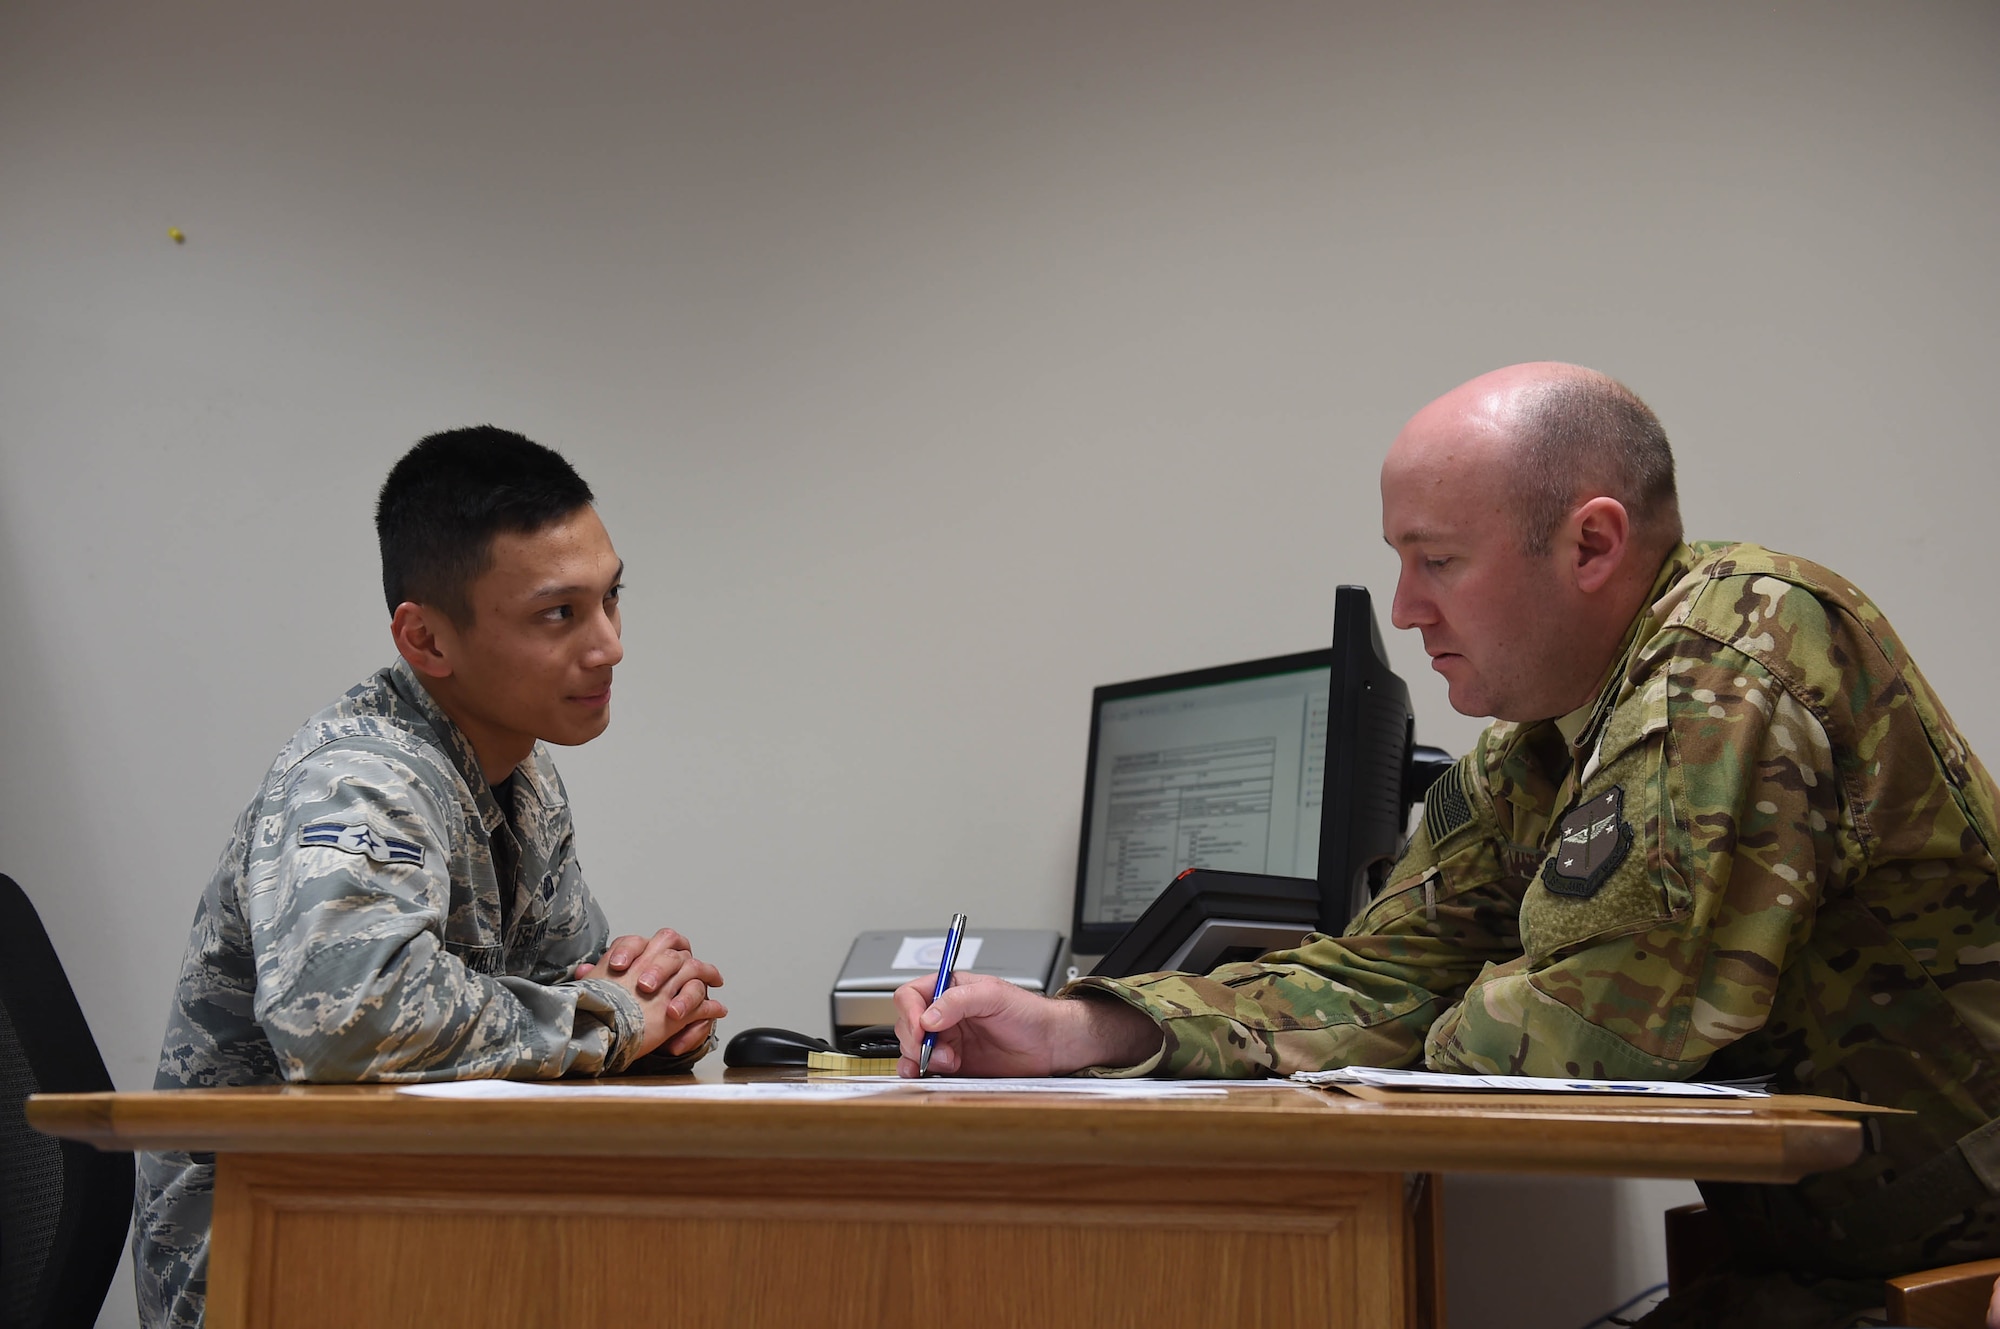 Two Airmen sit a desk with a computer